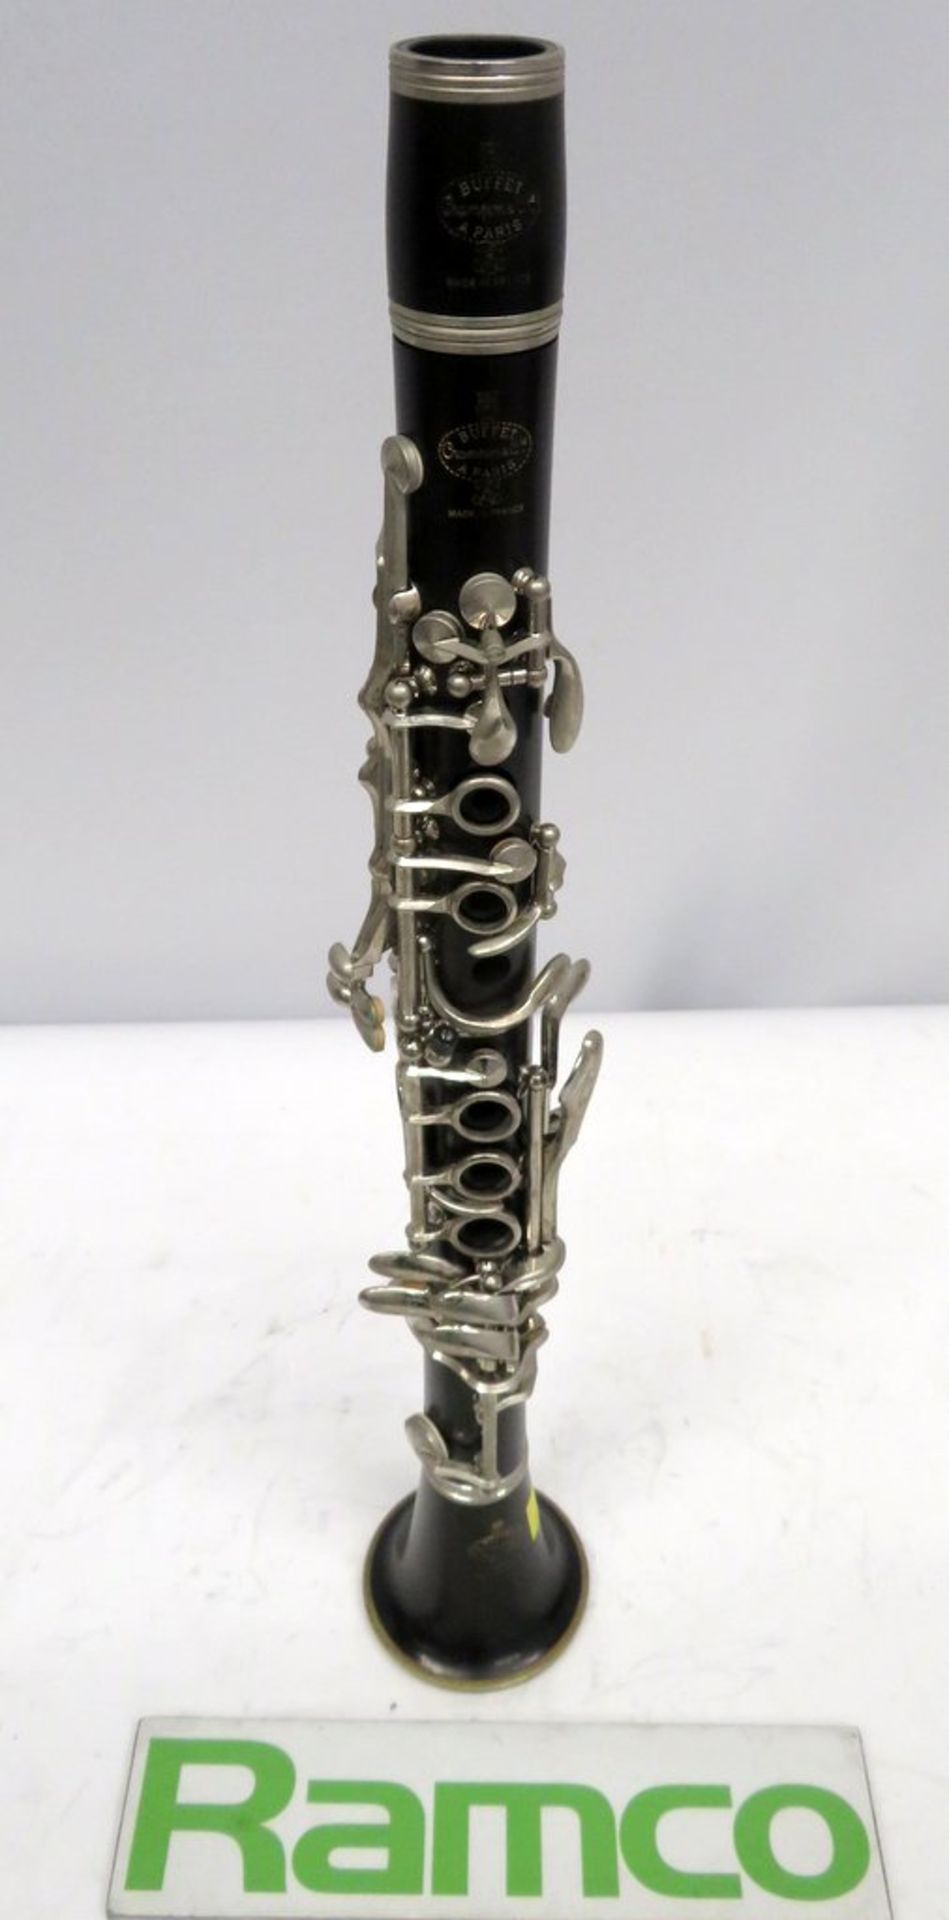 Buffet Crampon E Flat Clarinet Complete With Case. - Image 4 of 14